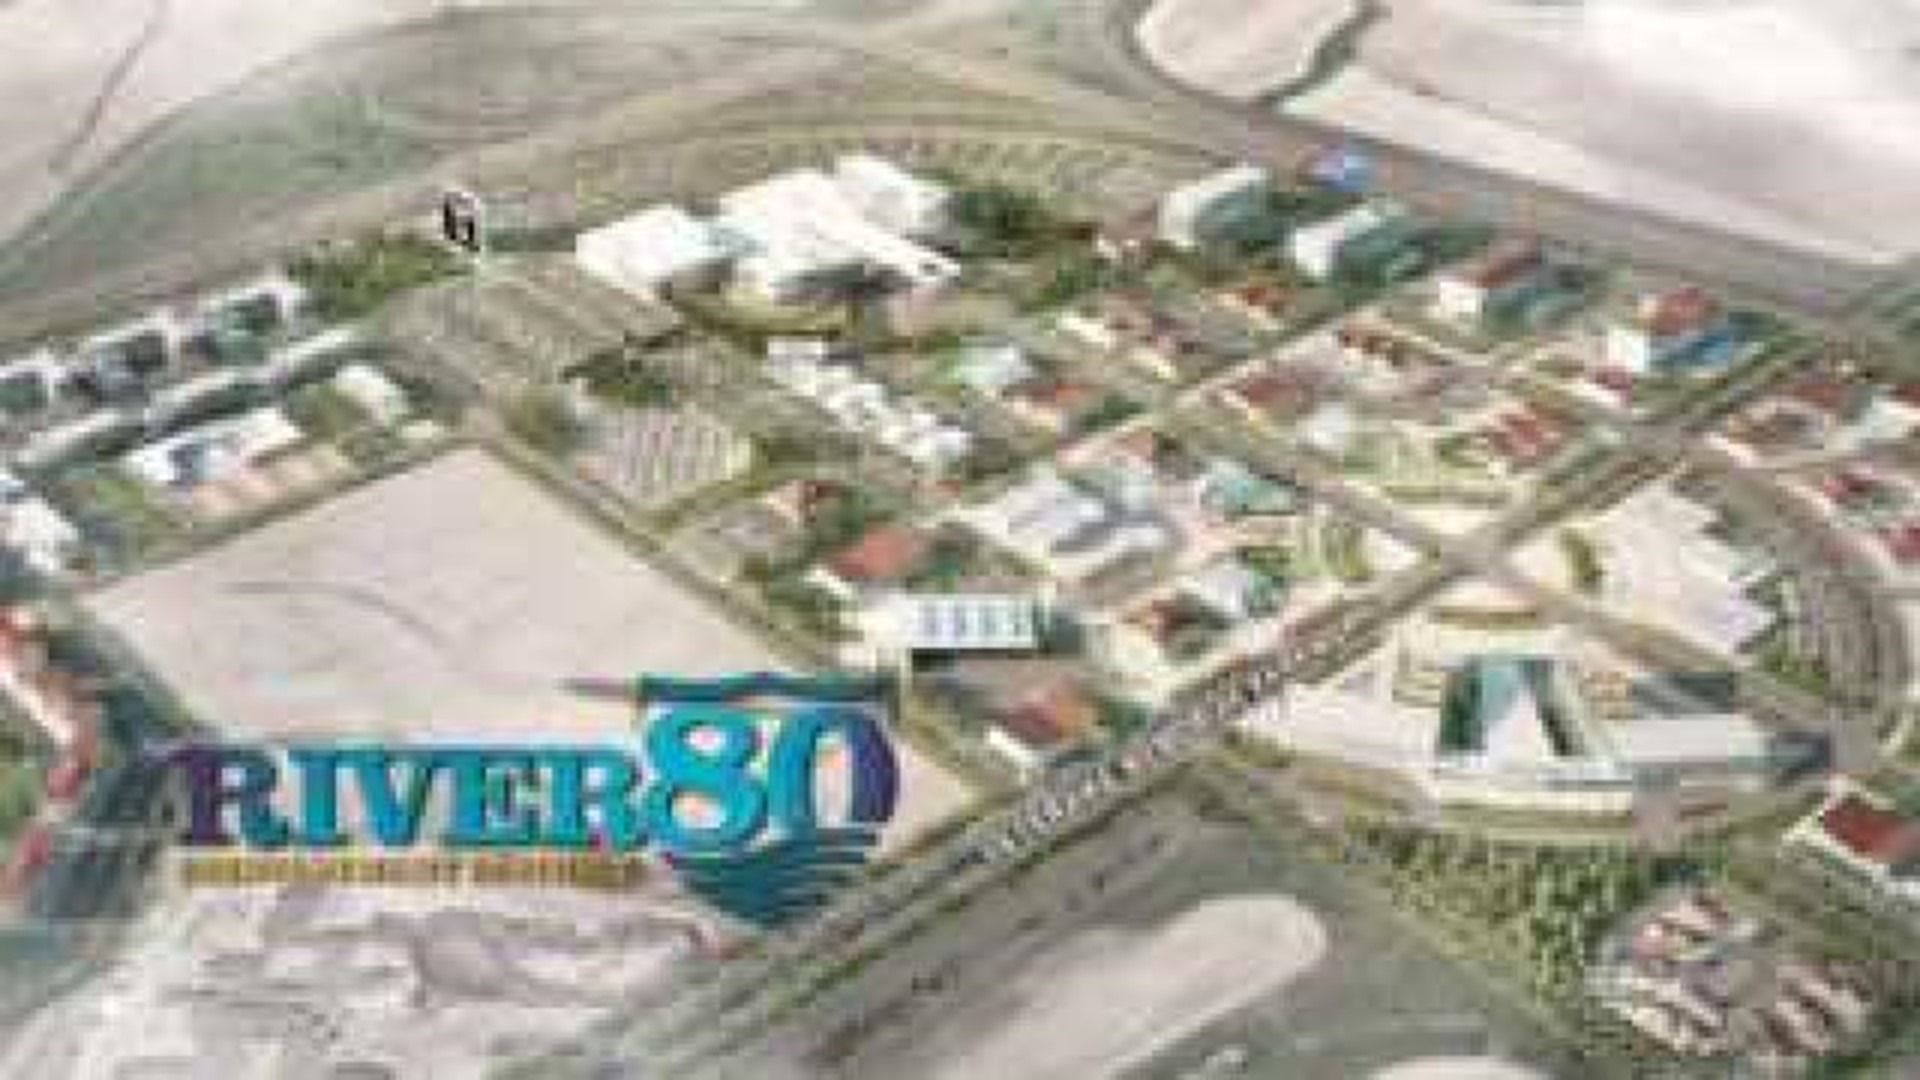 Investment money denied for River 80 project